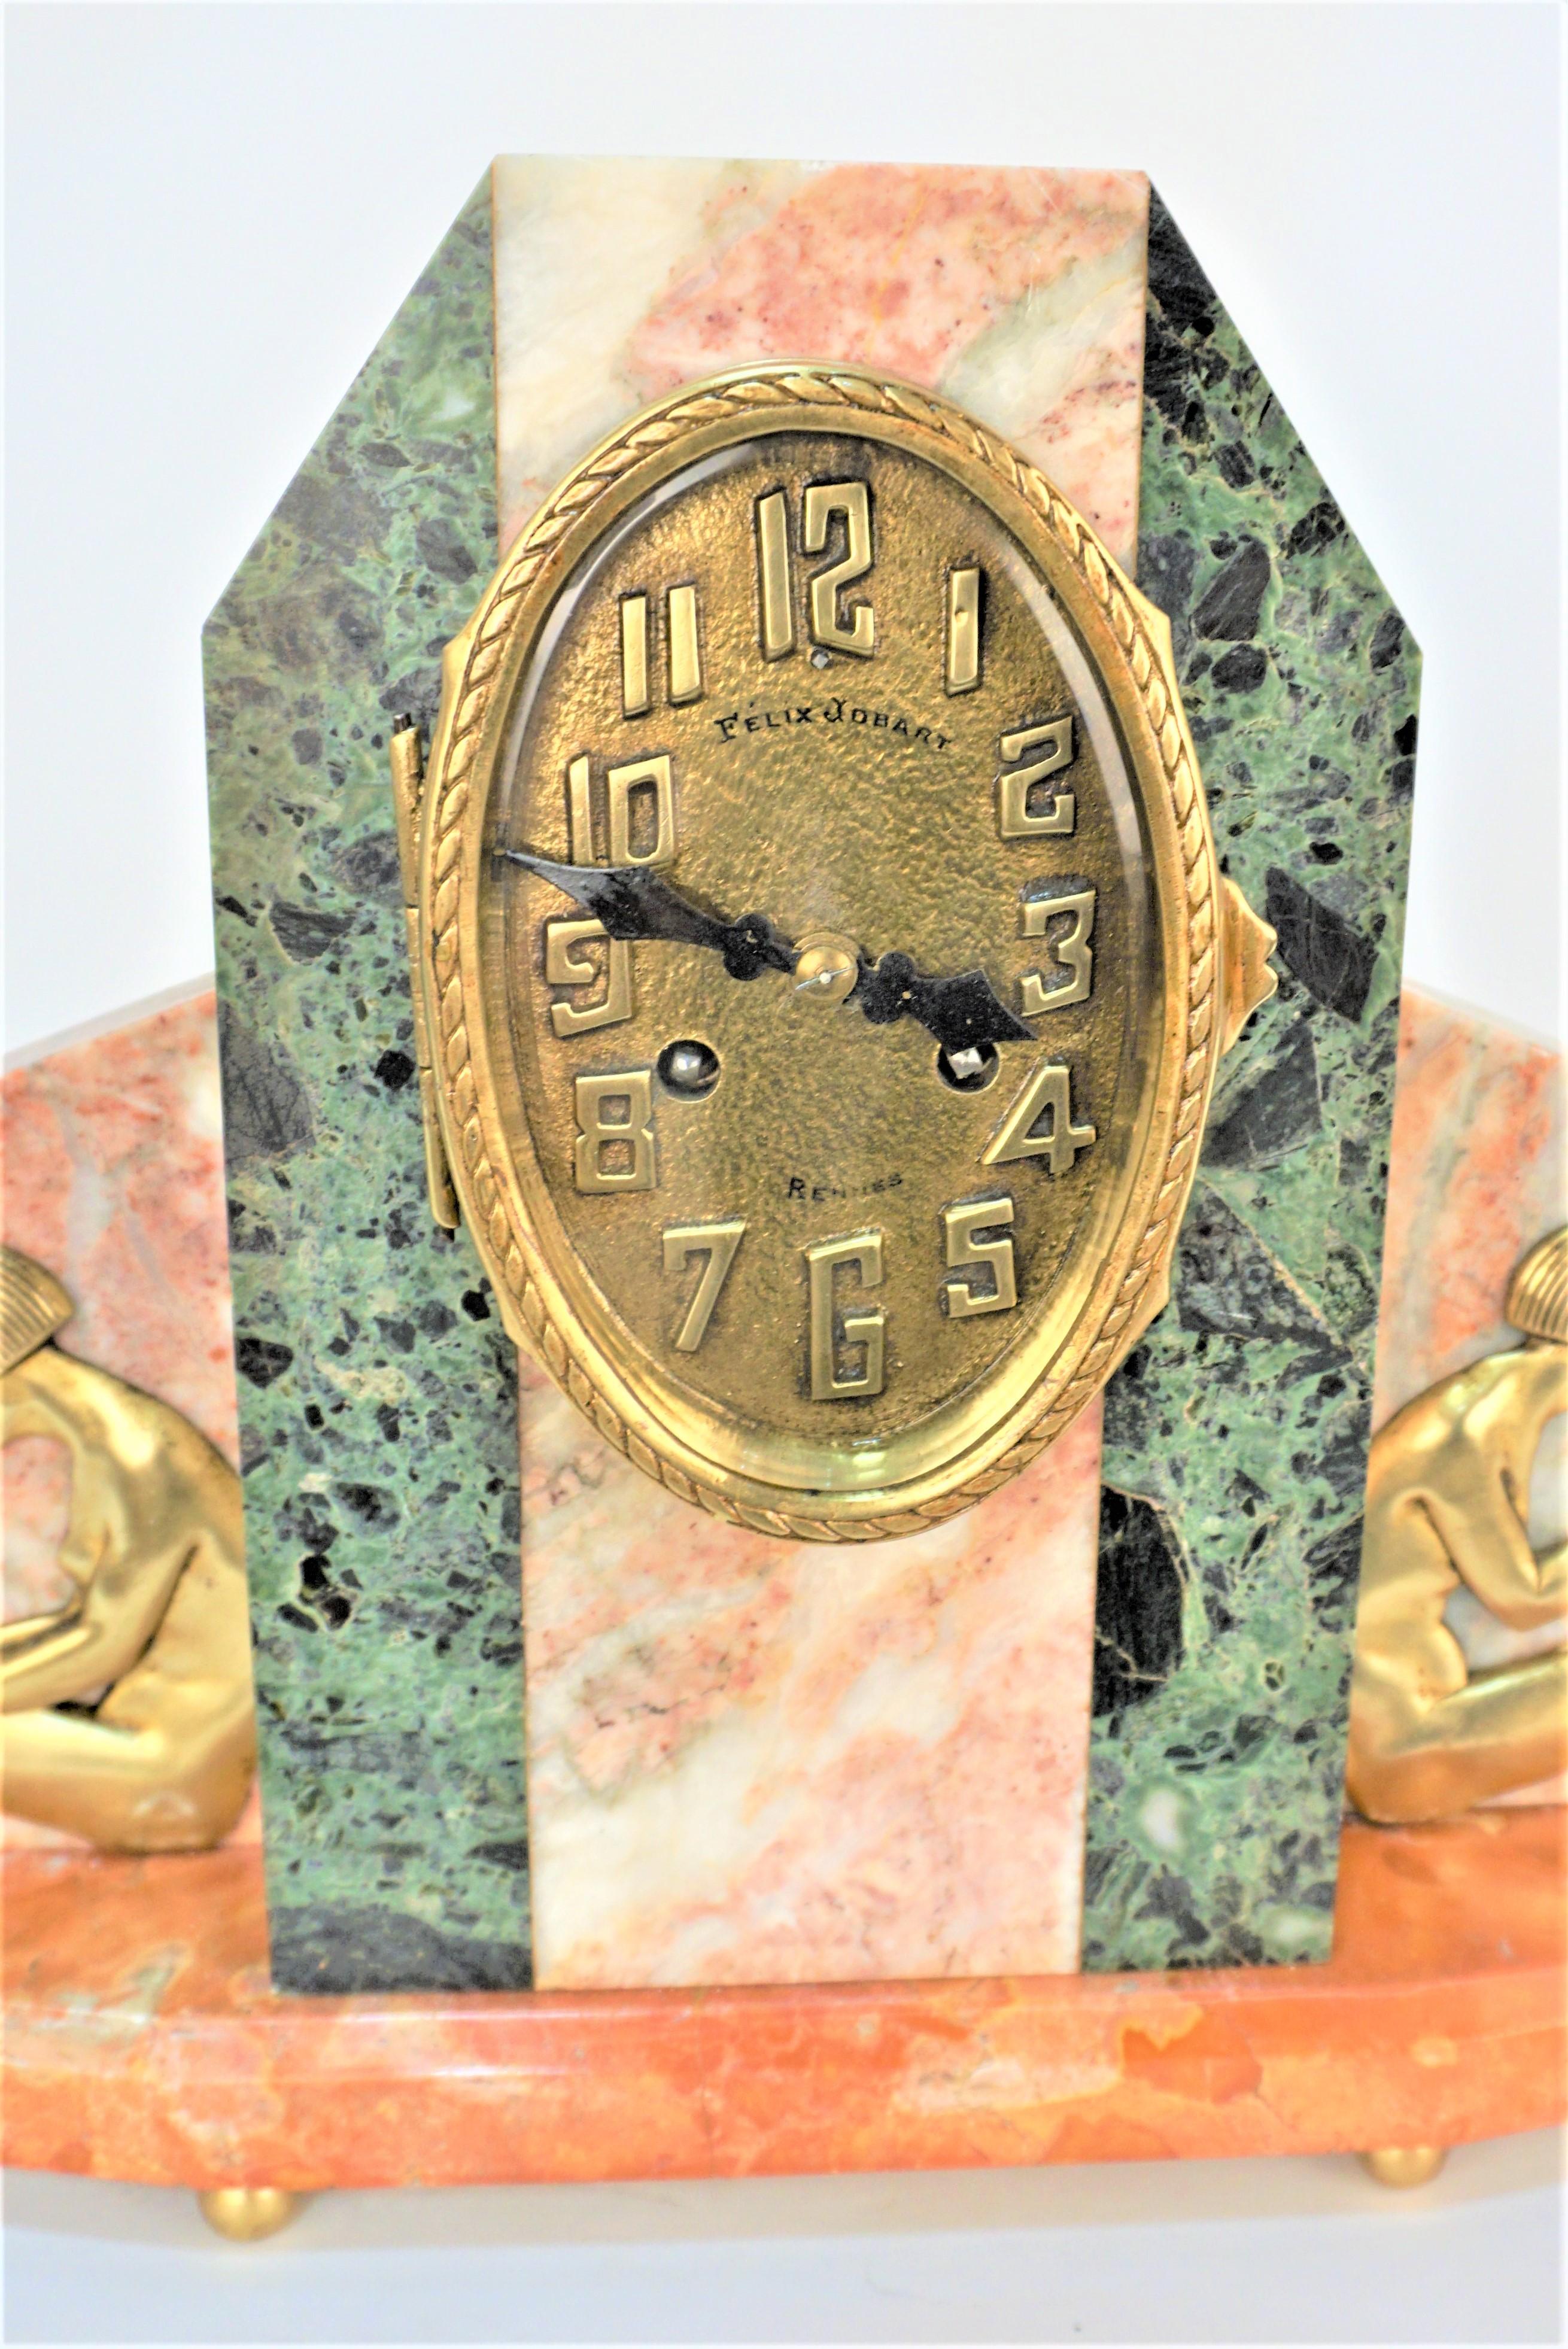 Very elegant art deco Three color marble and bronze clock circa 1920's
in beautiful working condition.
This clock has been professionally cleaned and serviced.